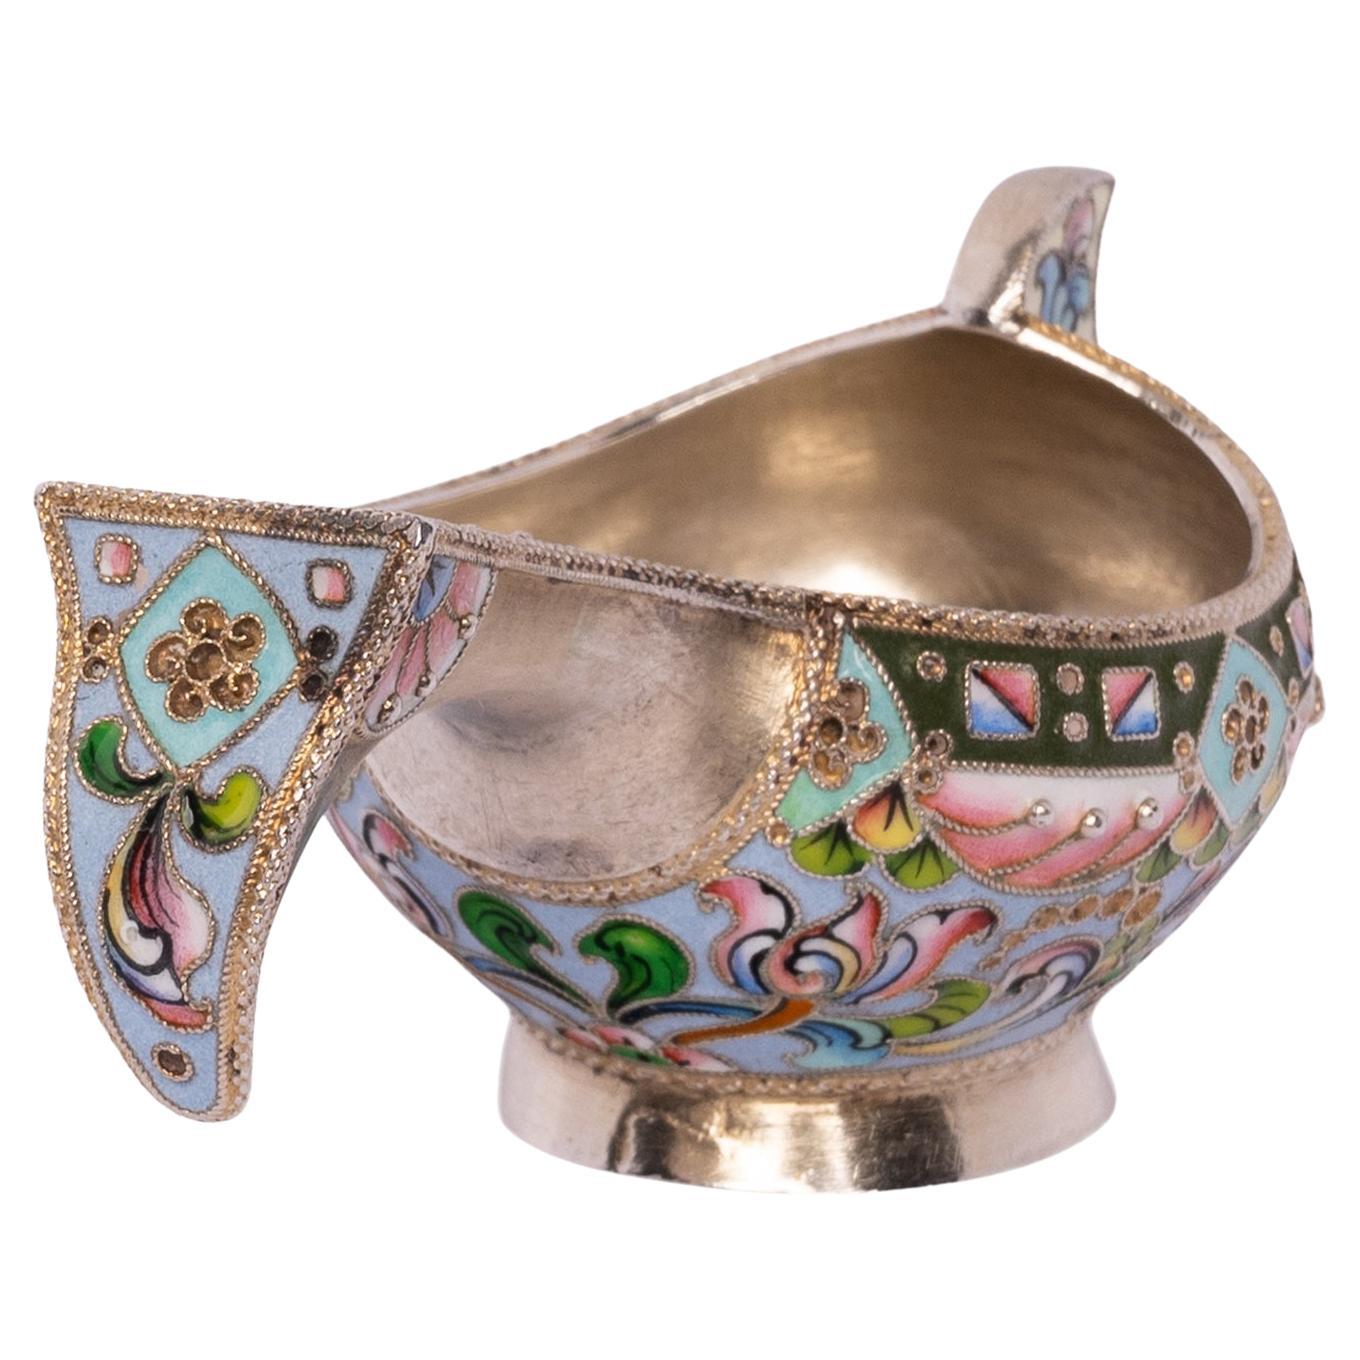 A very good antique Imperial Russian silver-gilt cloisonne enamel kovsh, Moscow, circa 1908.
The kovsh of traditional shape with all over muti-color cloisonne enamel decoration, the kovsh having both floral & geometric cloisonne decoration to the